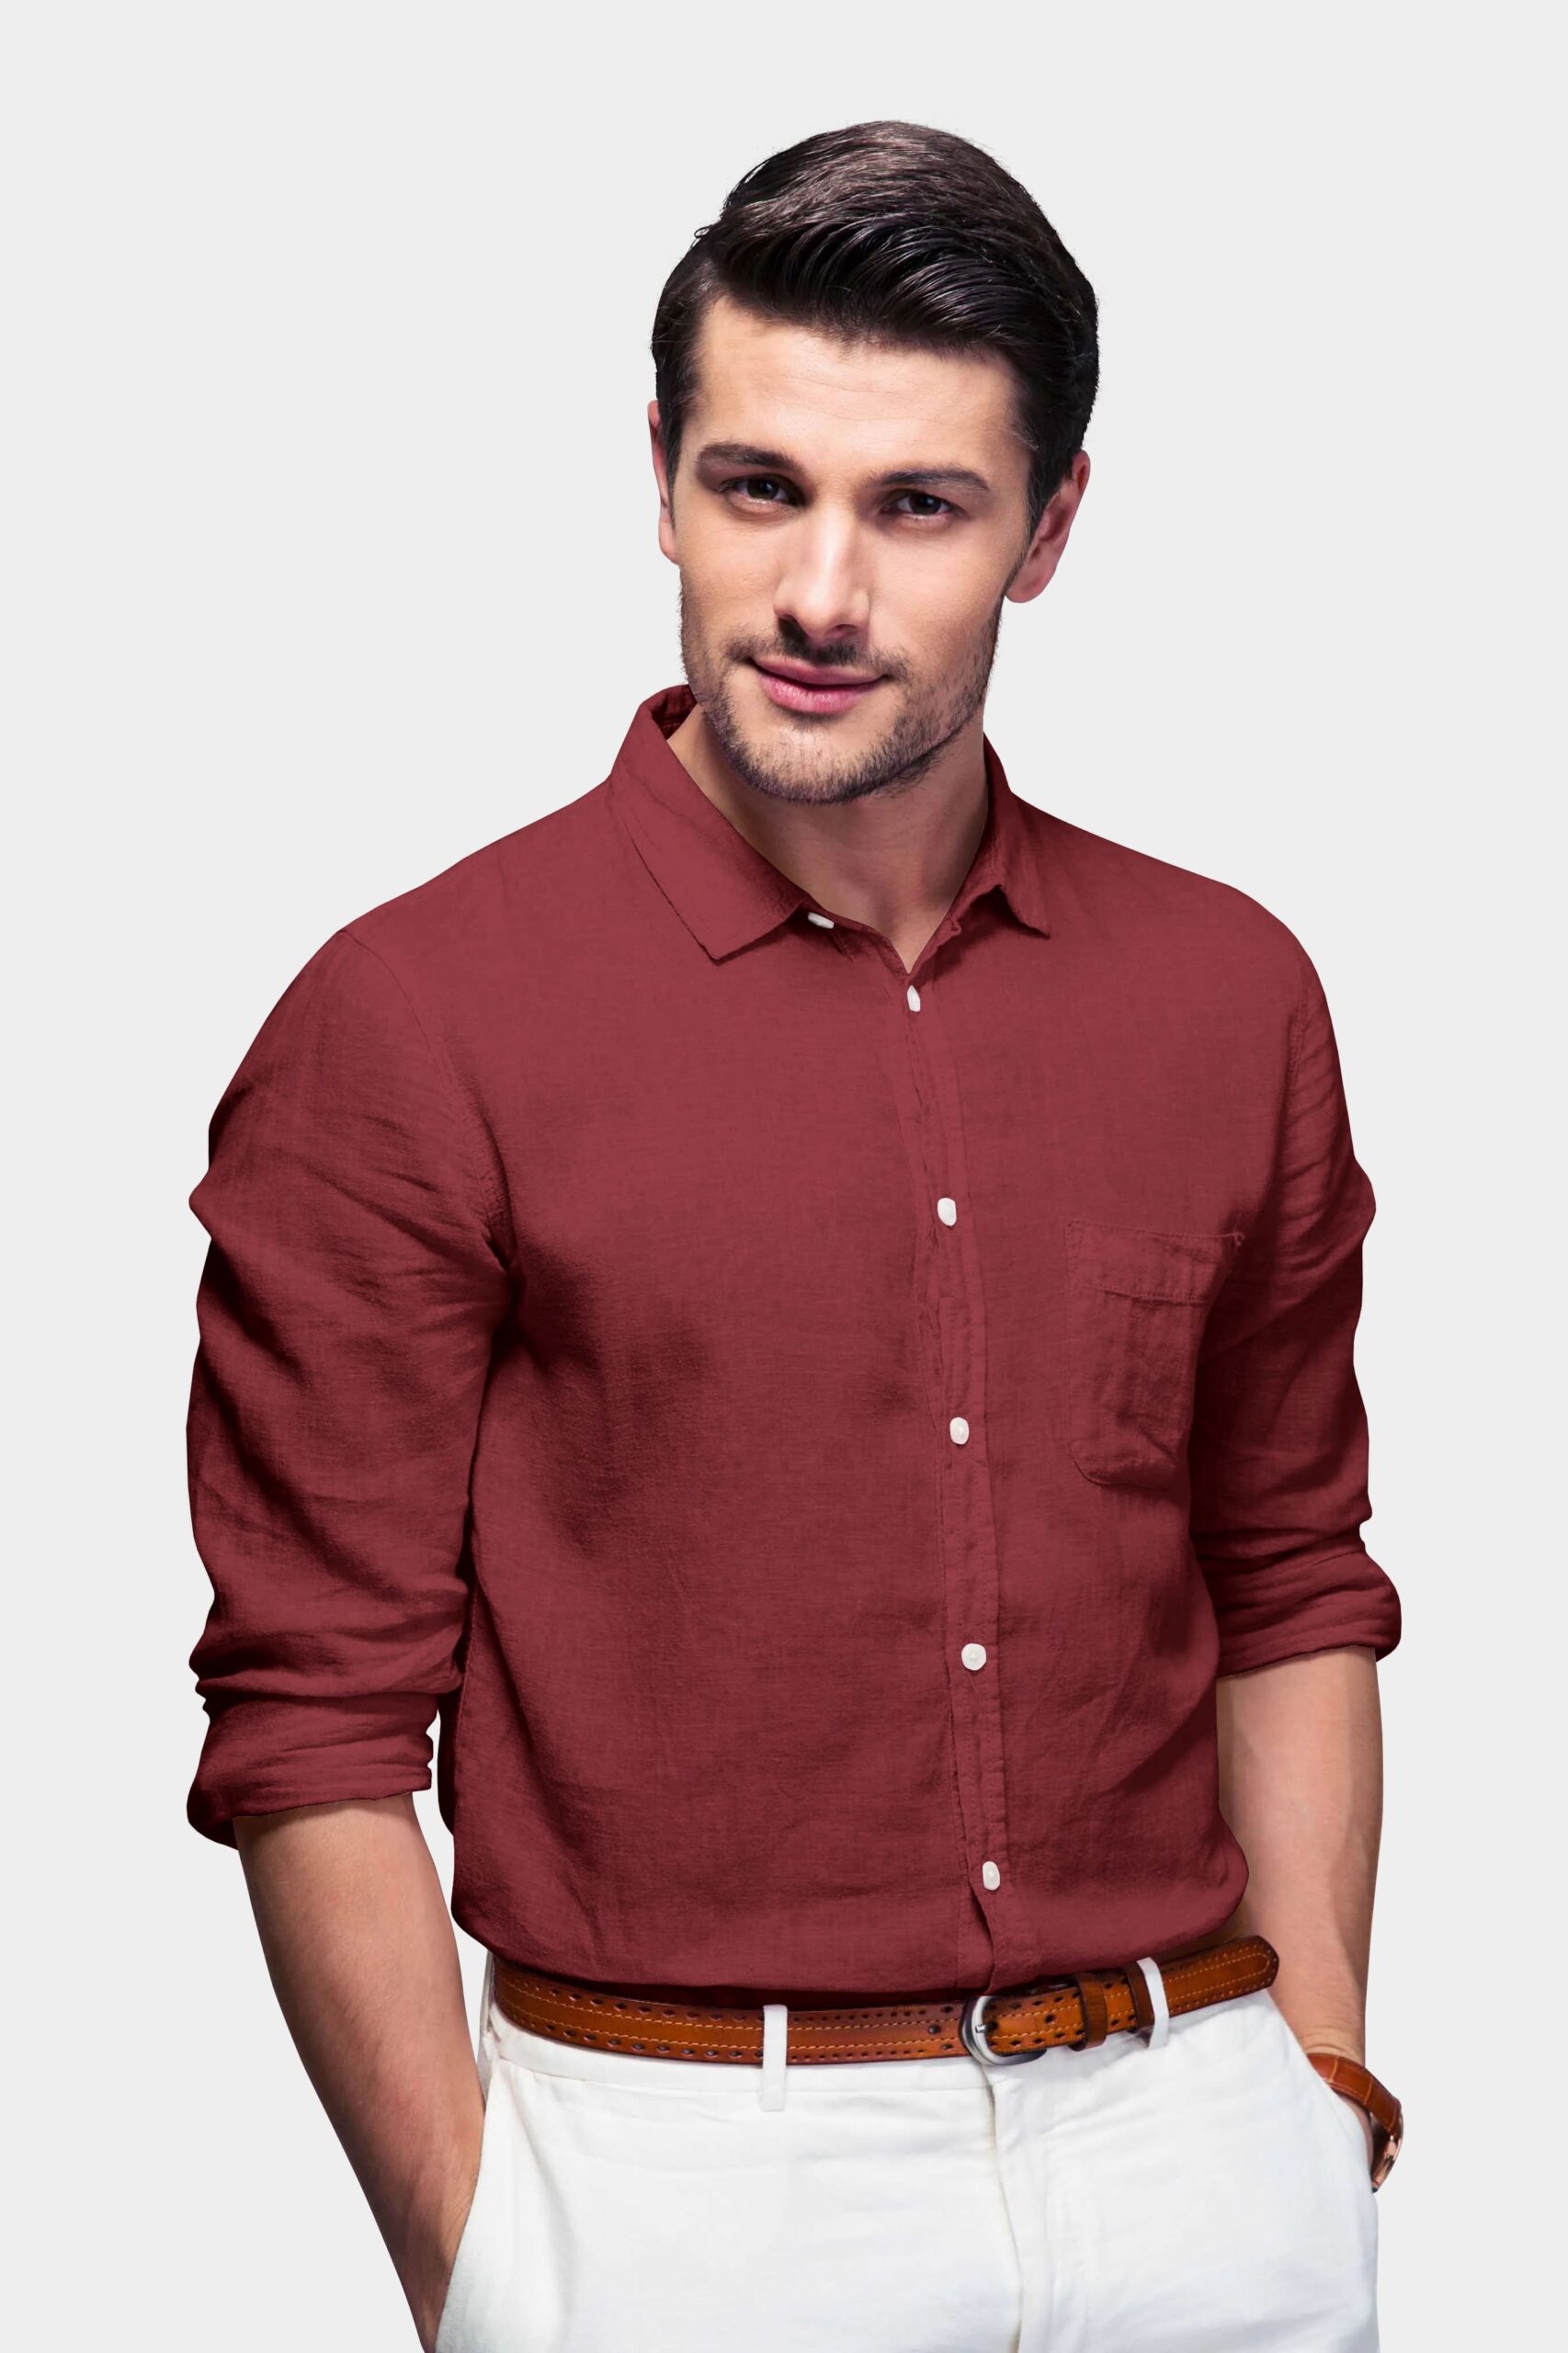 Party Shirts for Men 